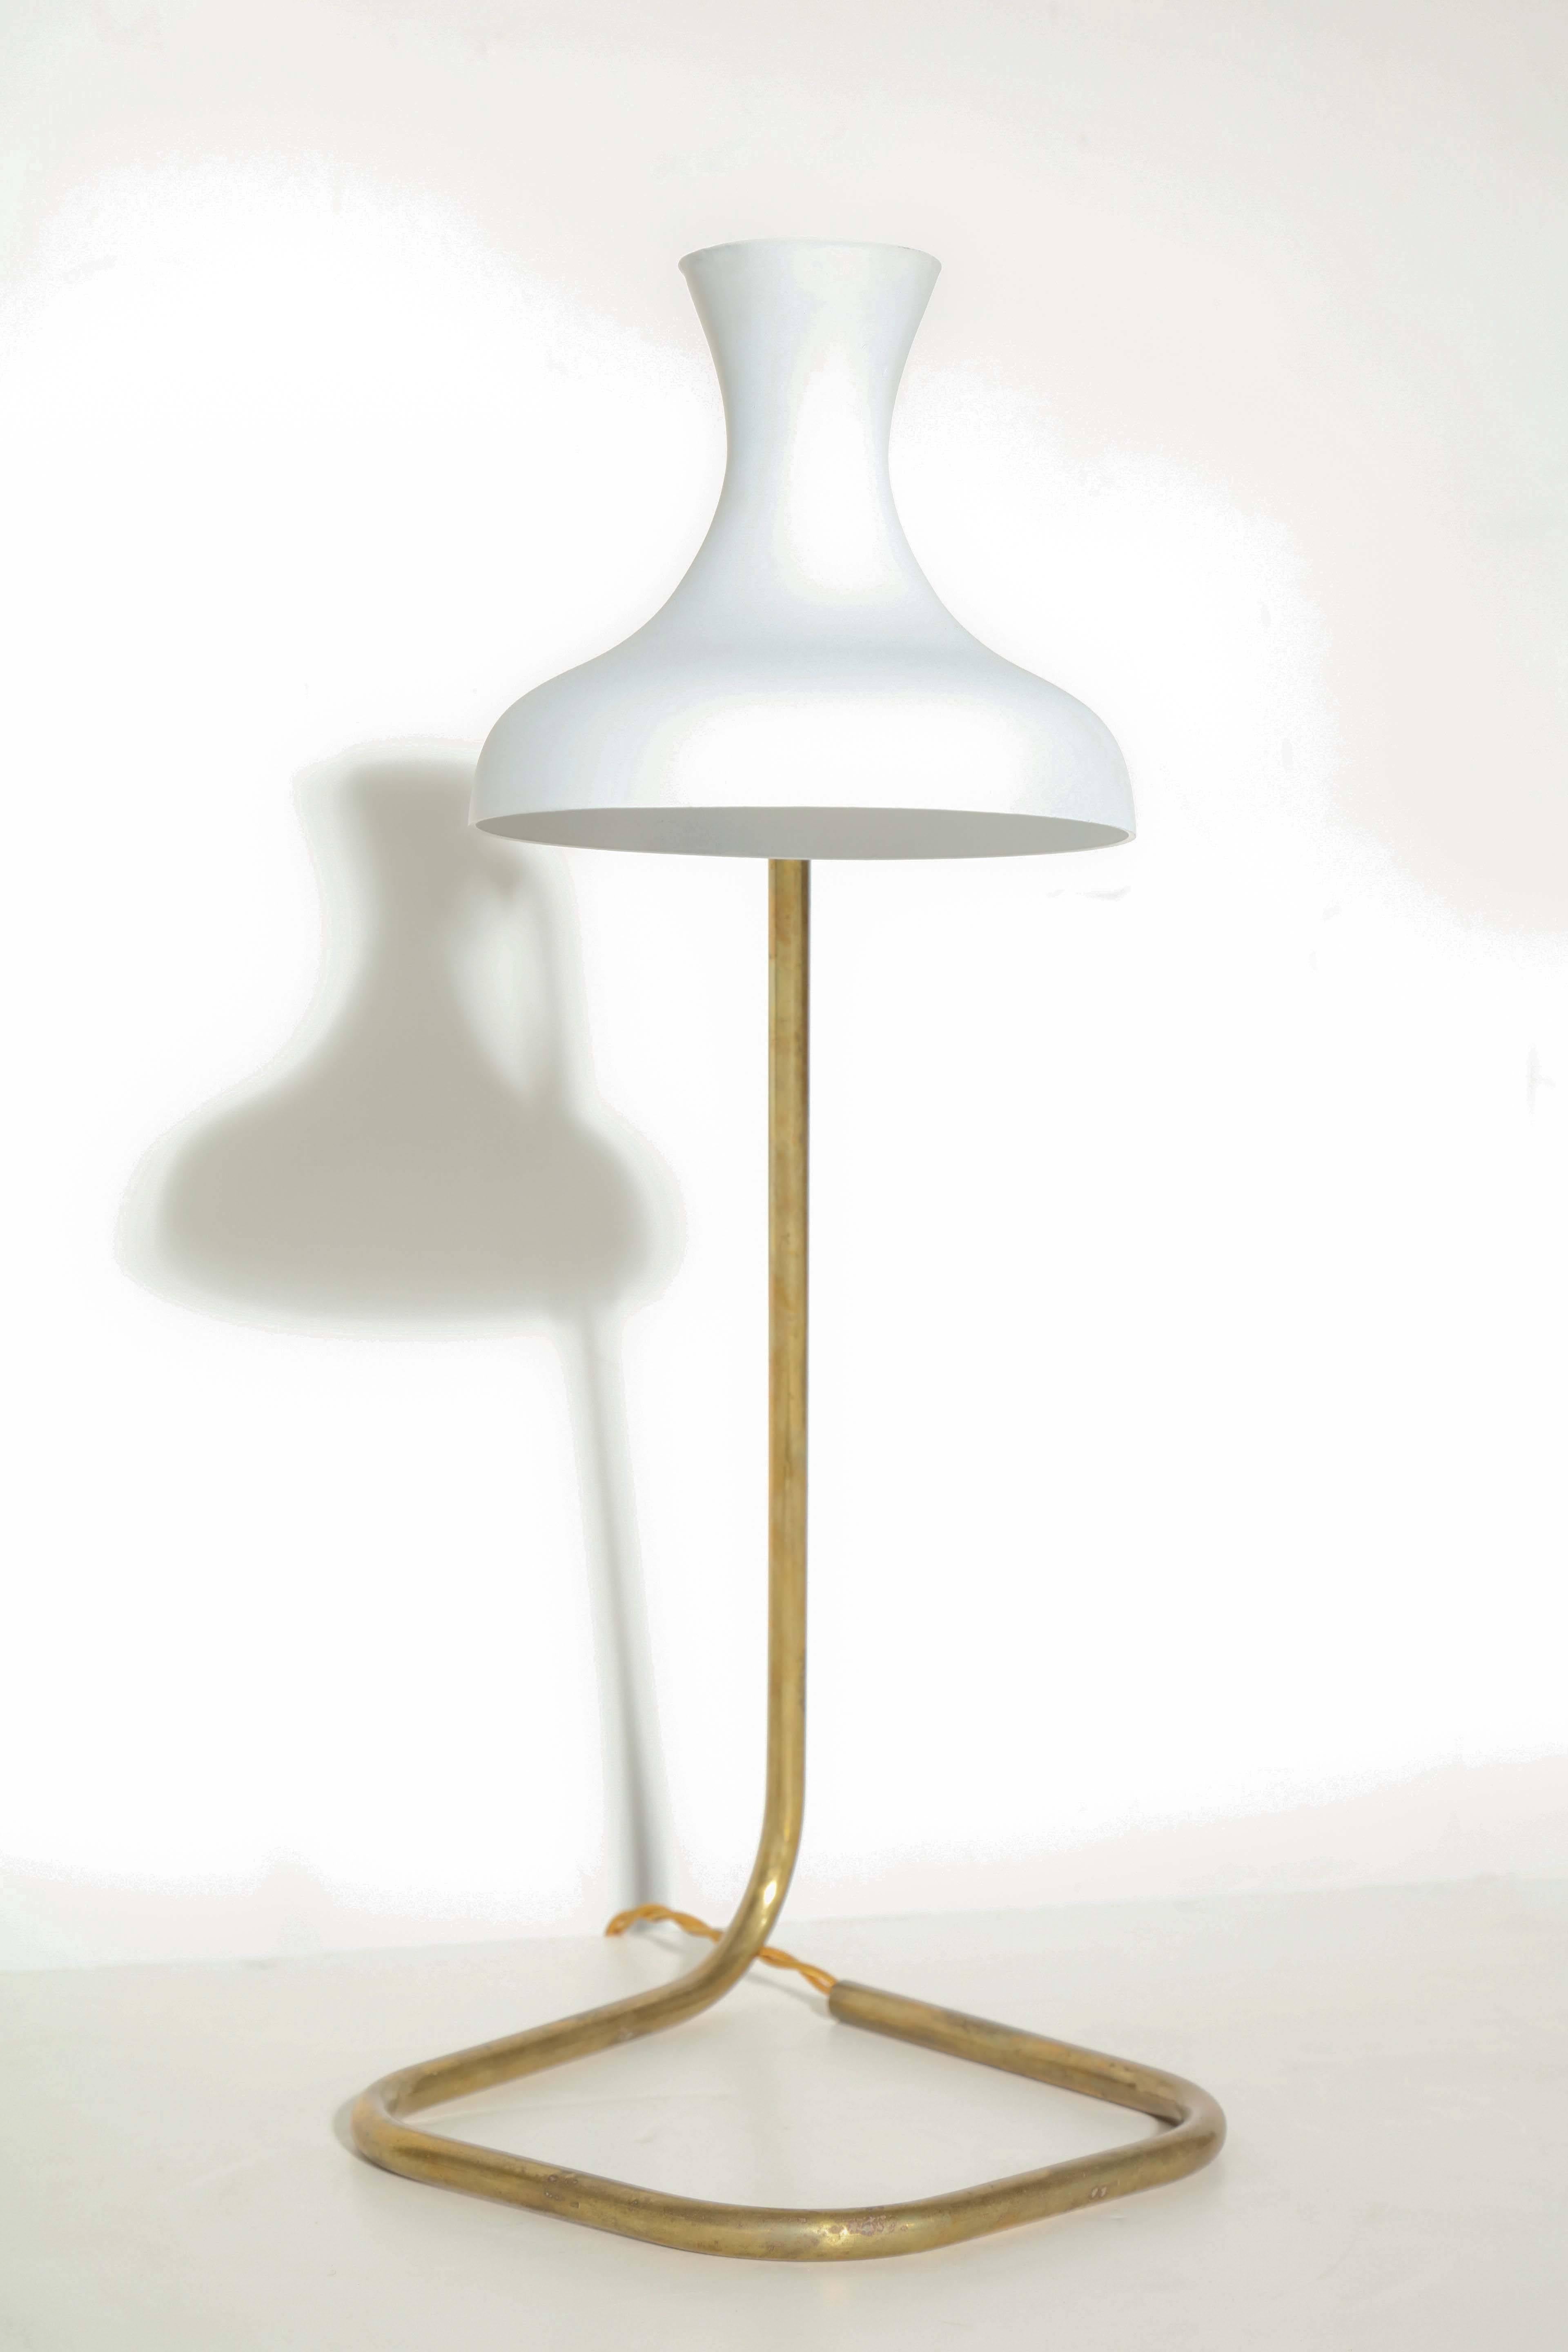 European 1950s Brass French Desk Lamp with White Shade